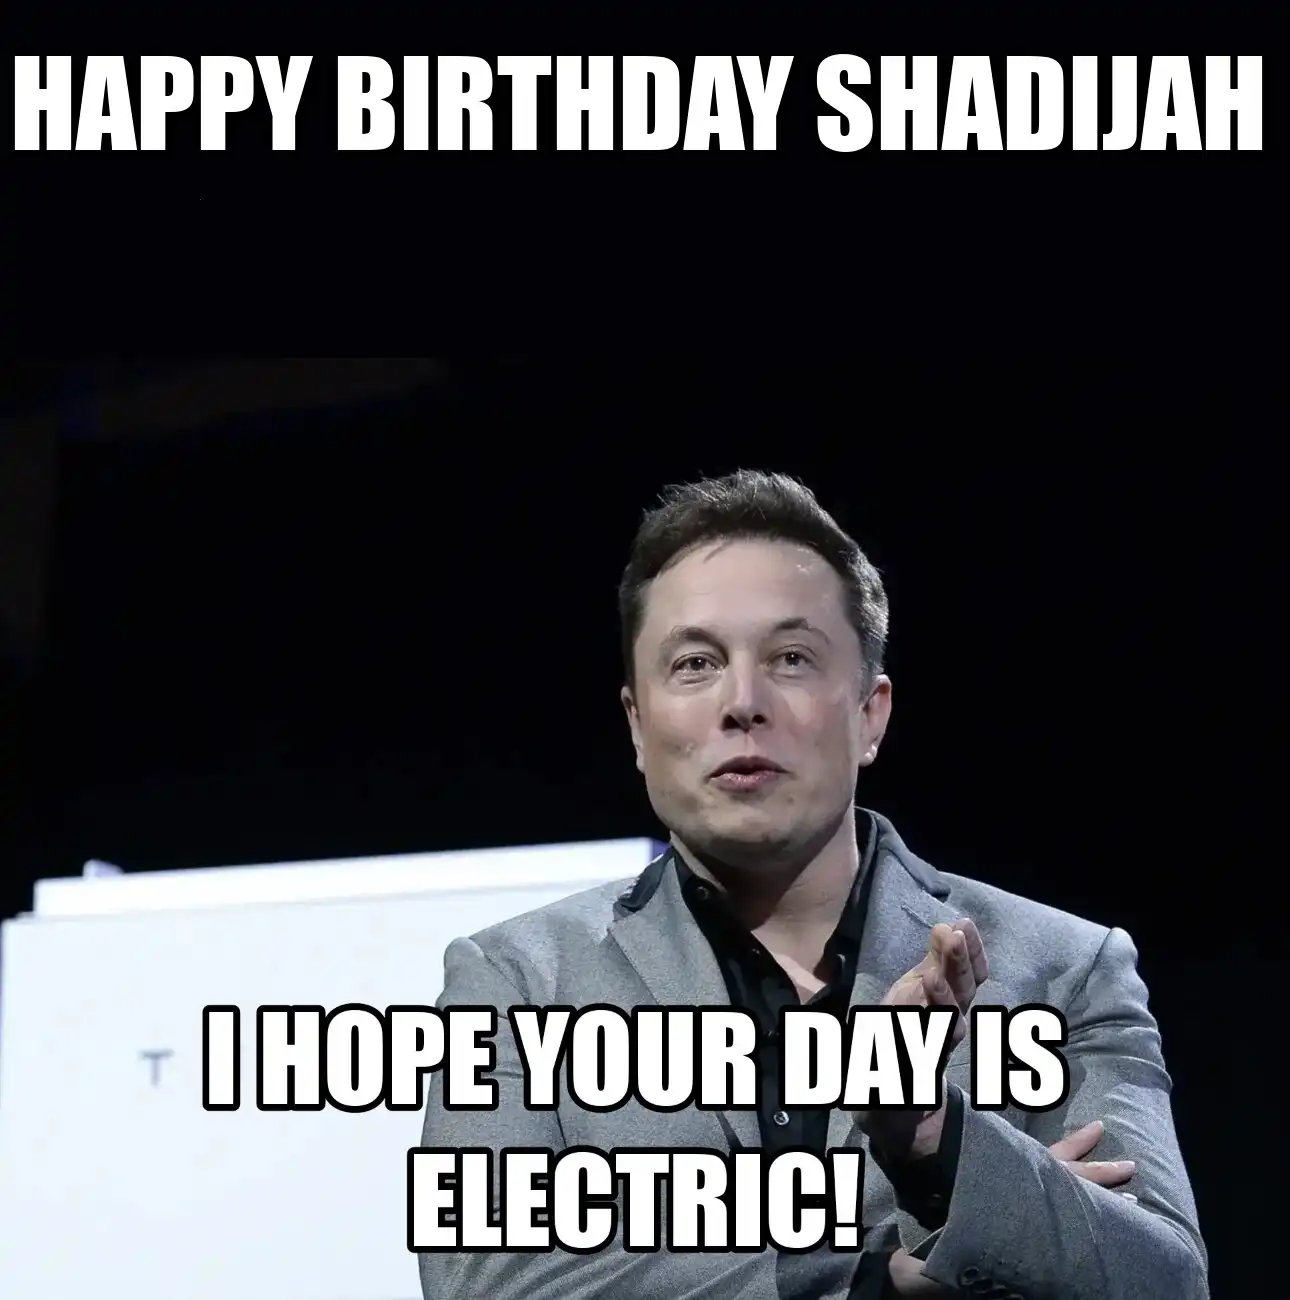 Happy Birthday Shadijah I Hope Your Day Is Electric Meme